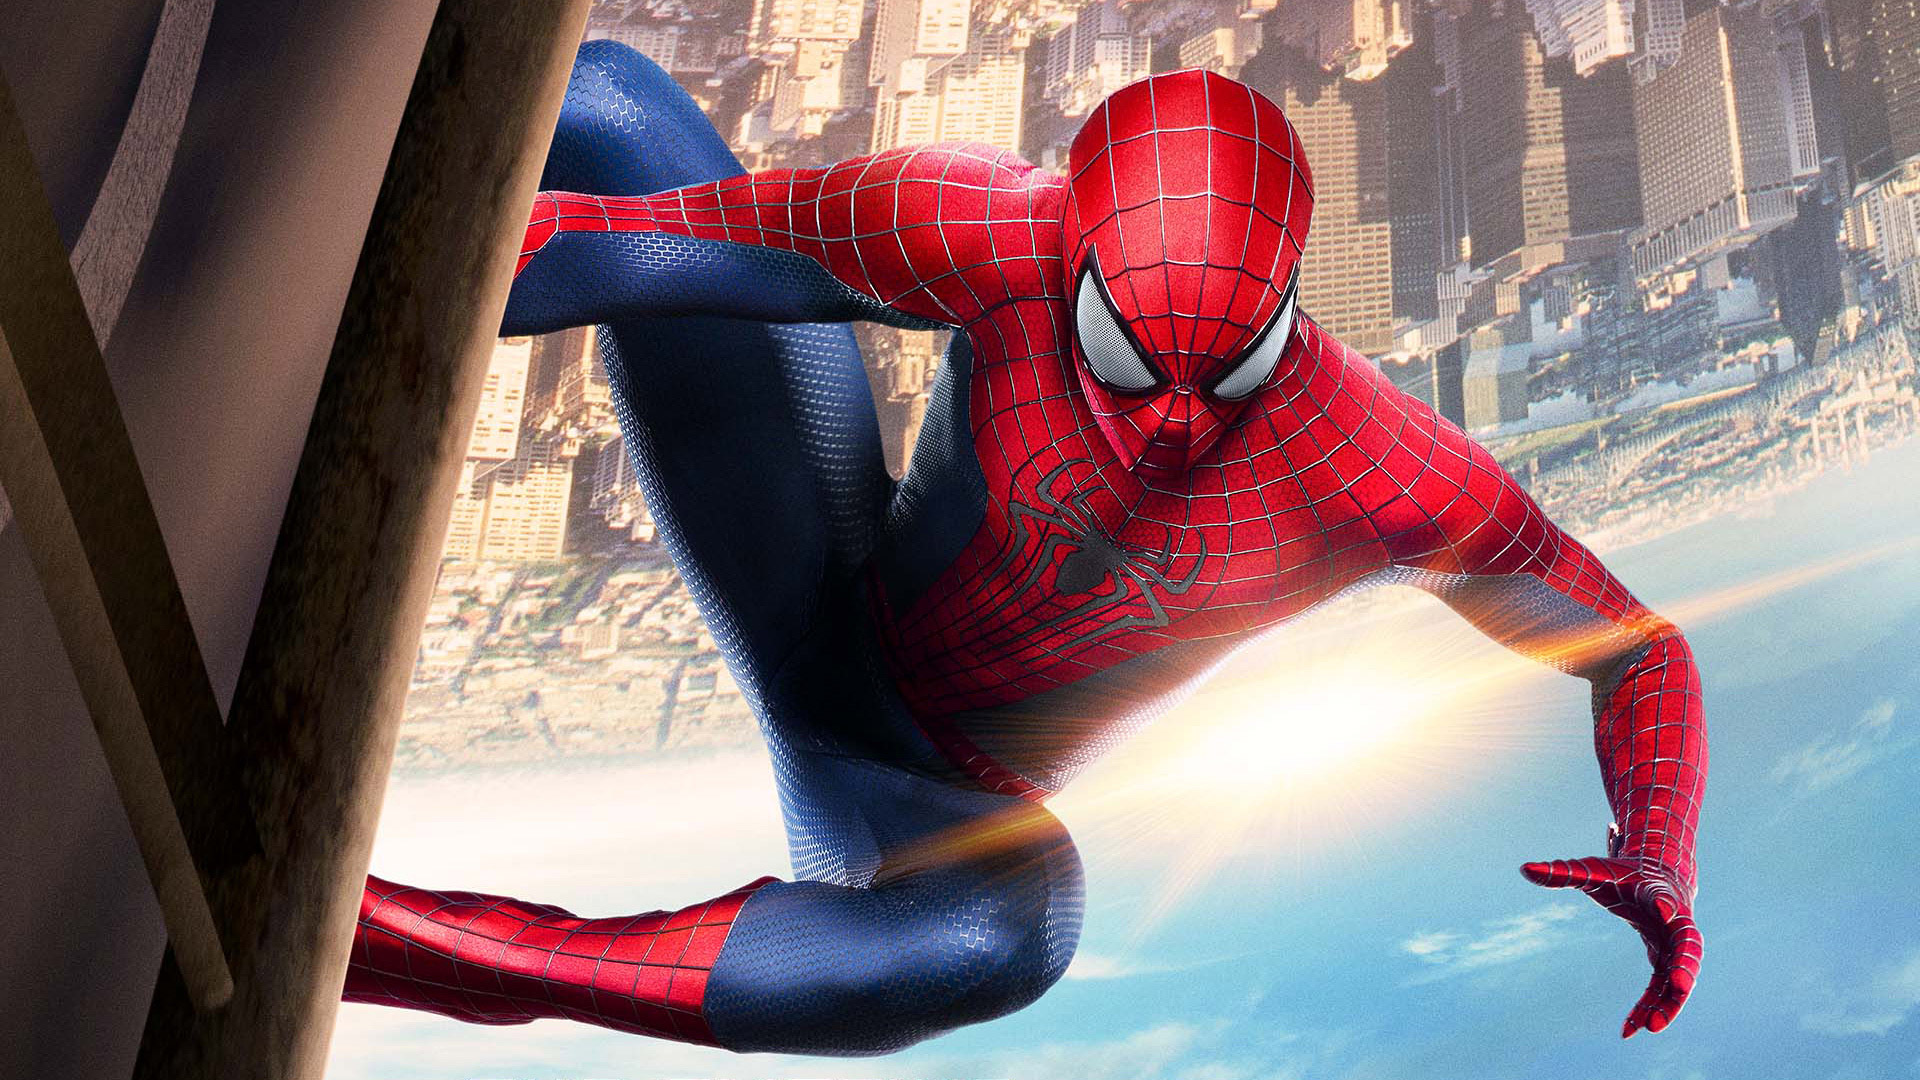 Free The Amazing Spider Man 2 Wallpaper In 1920x1080